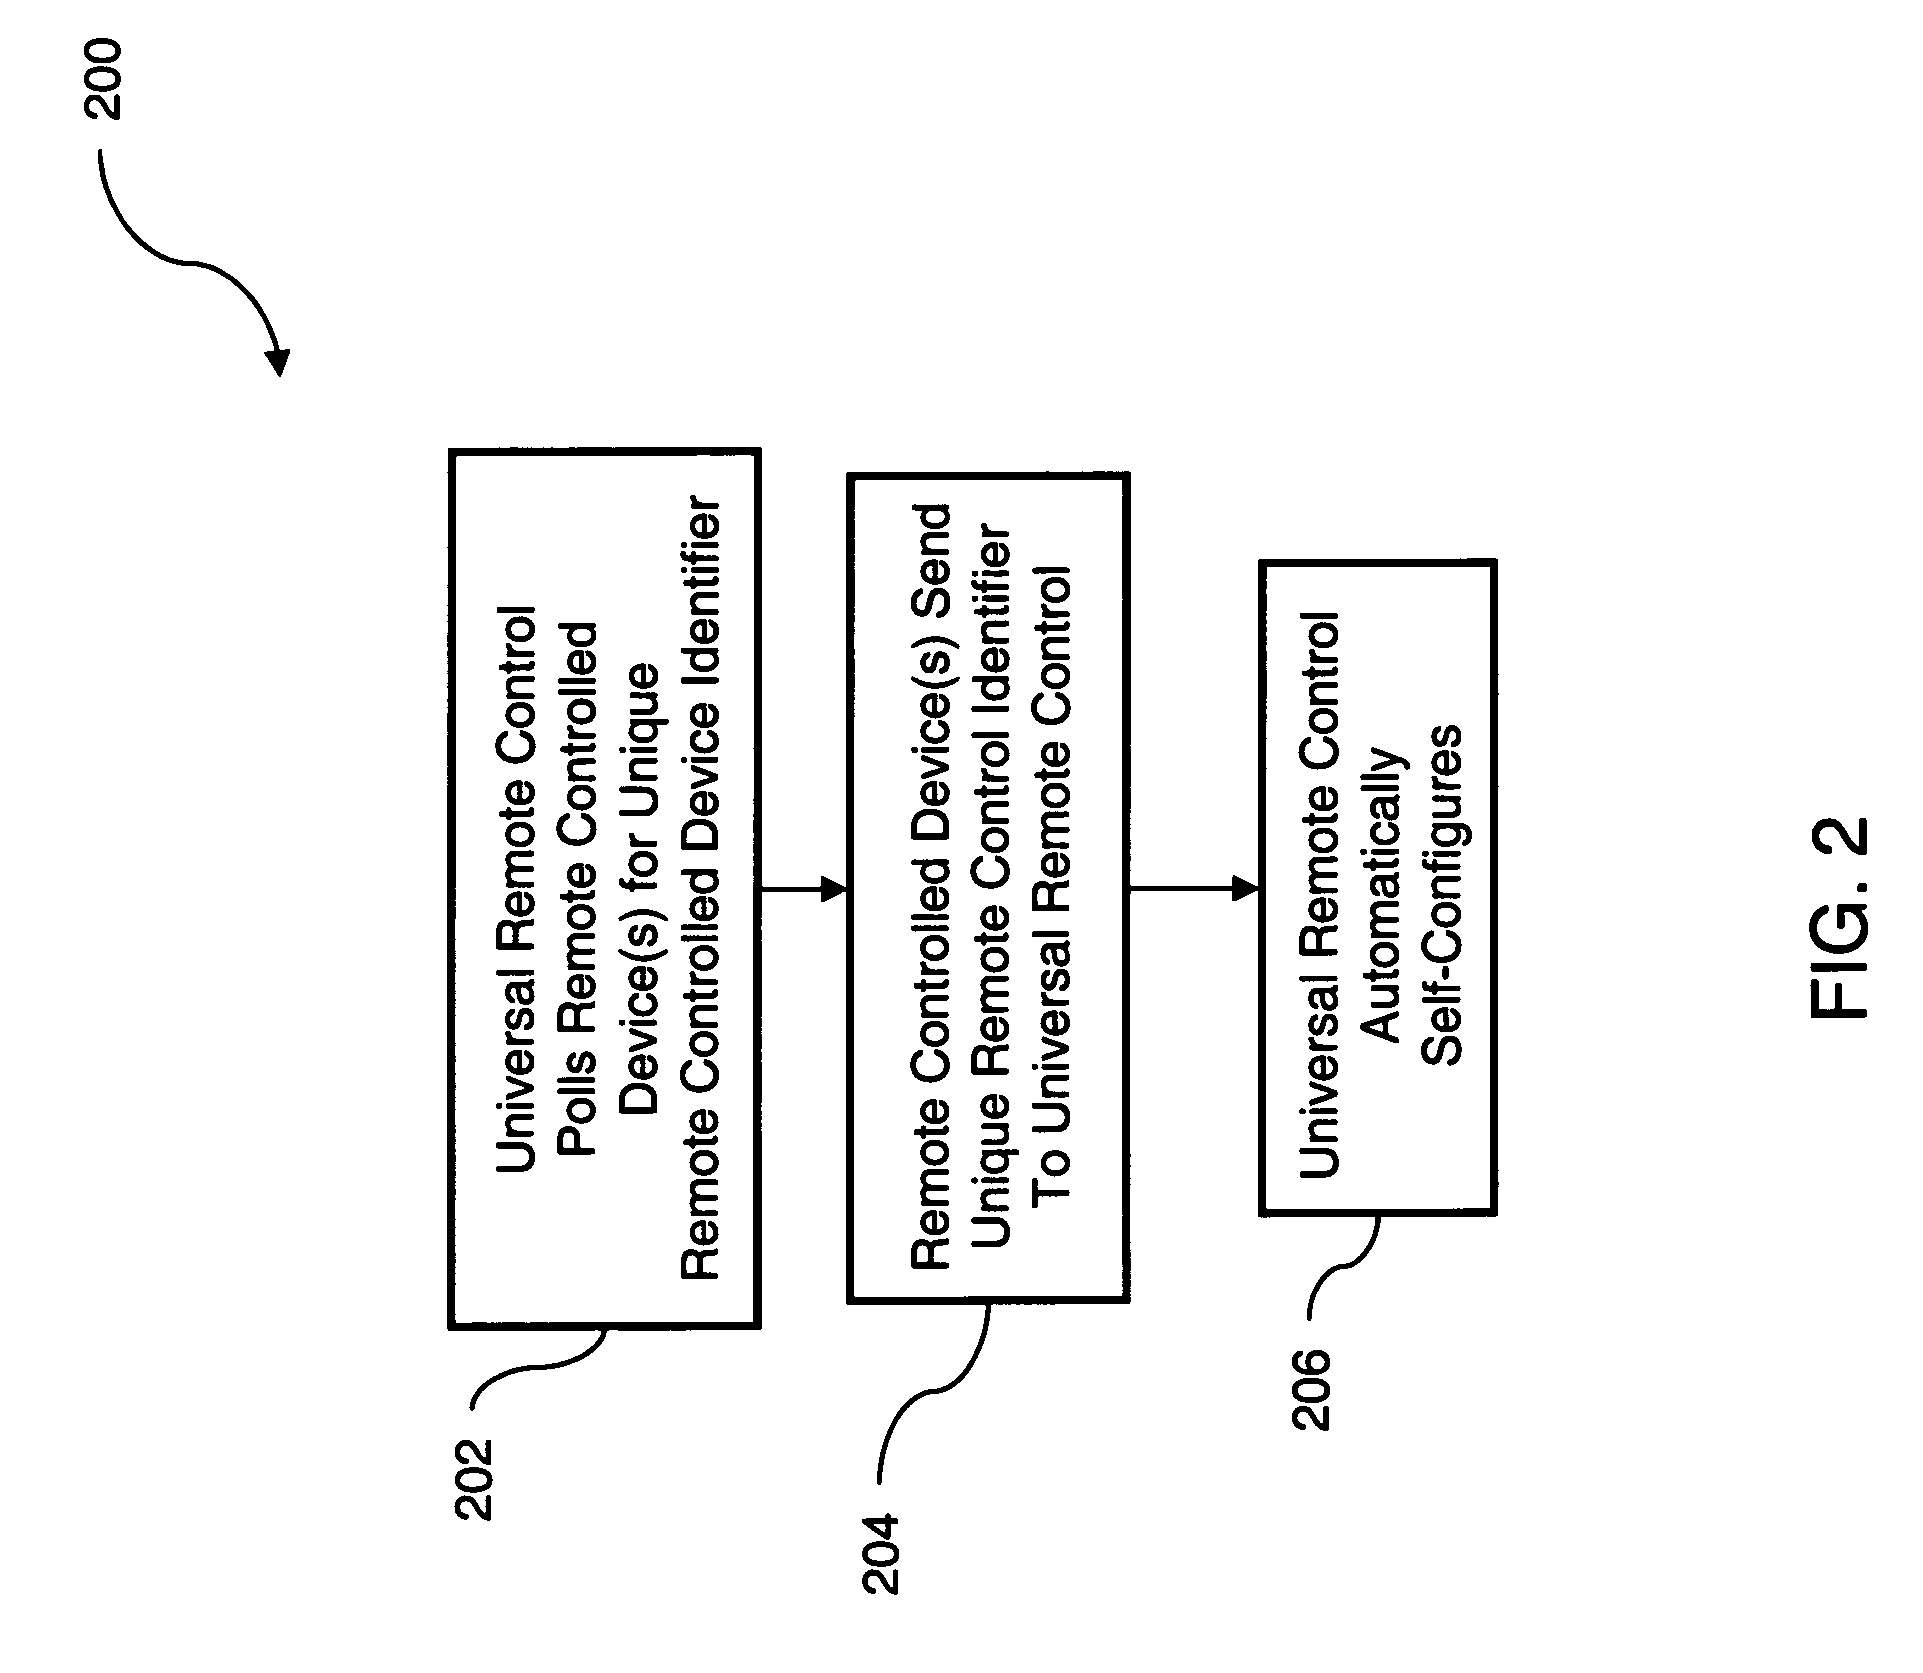 System and method for automated identification of end user devices by a universal remote control device